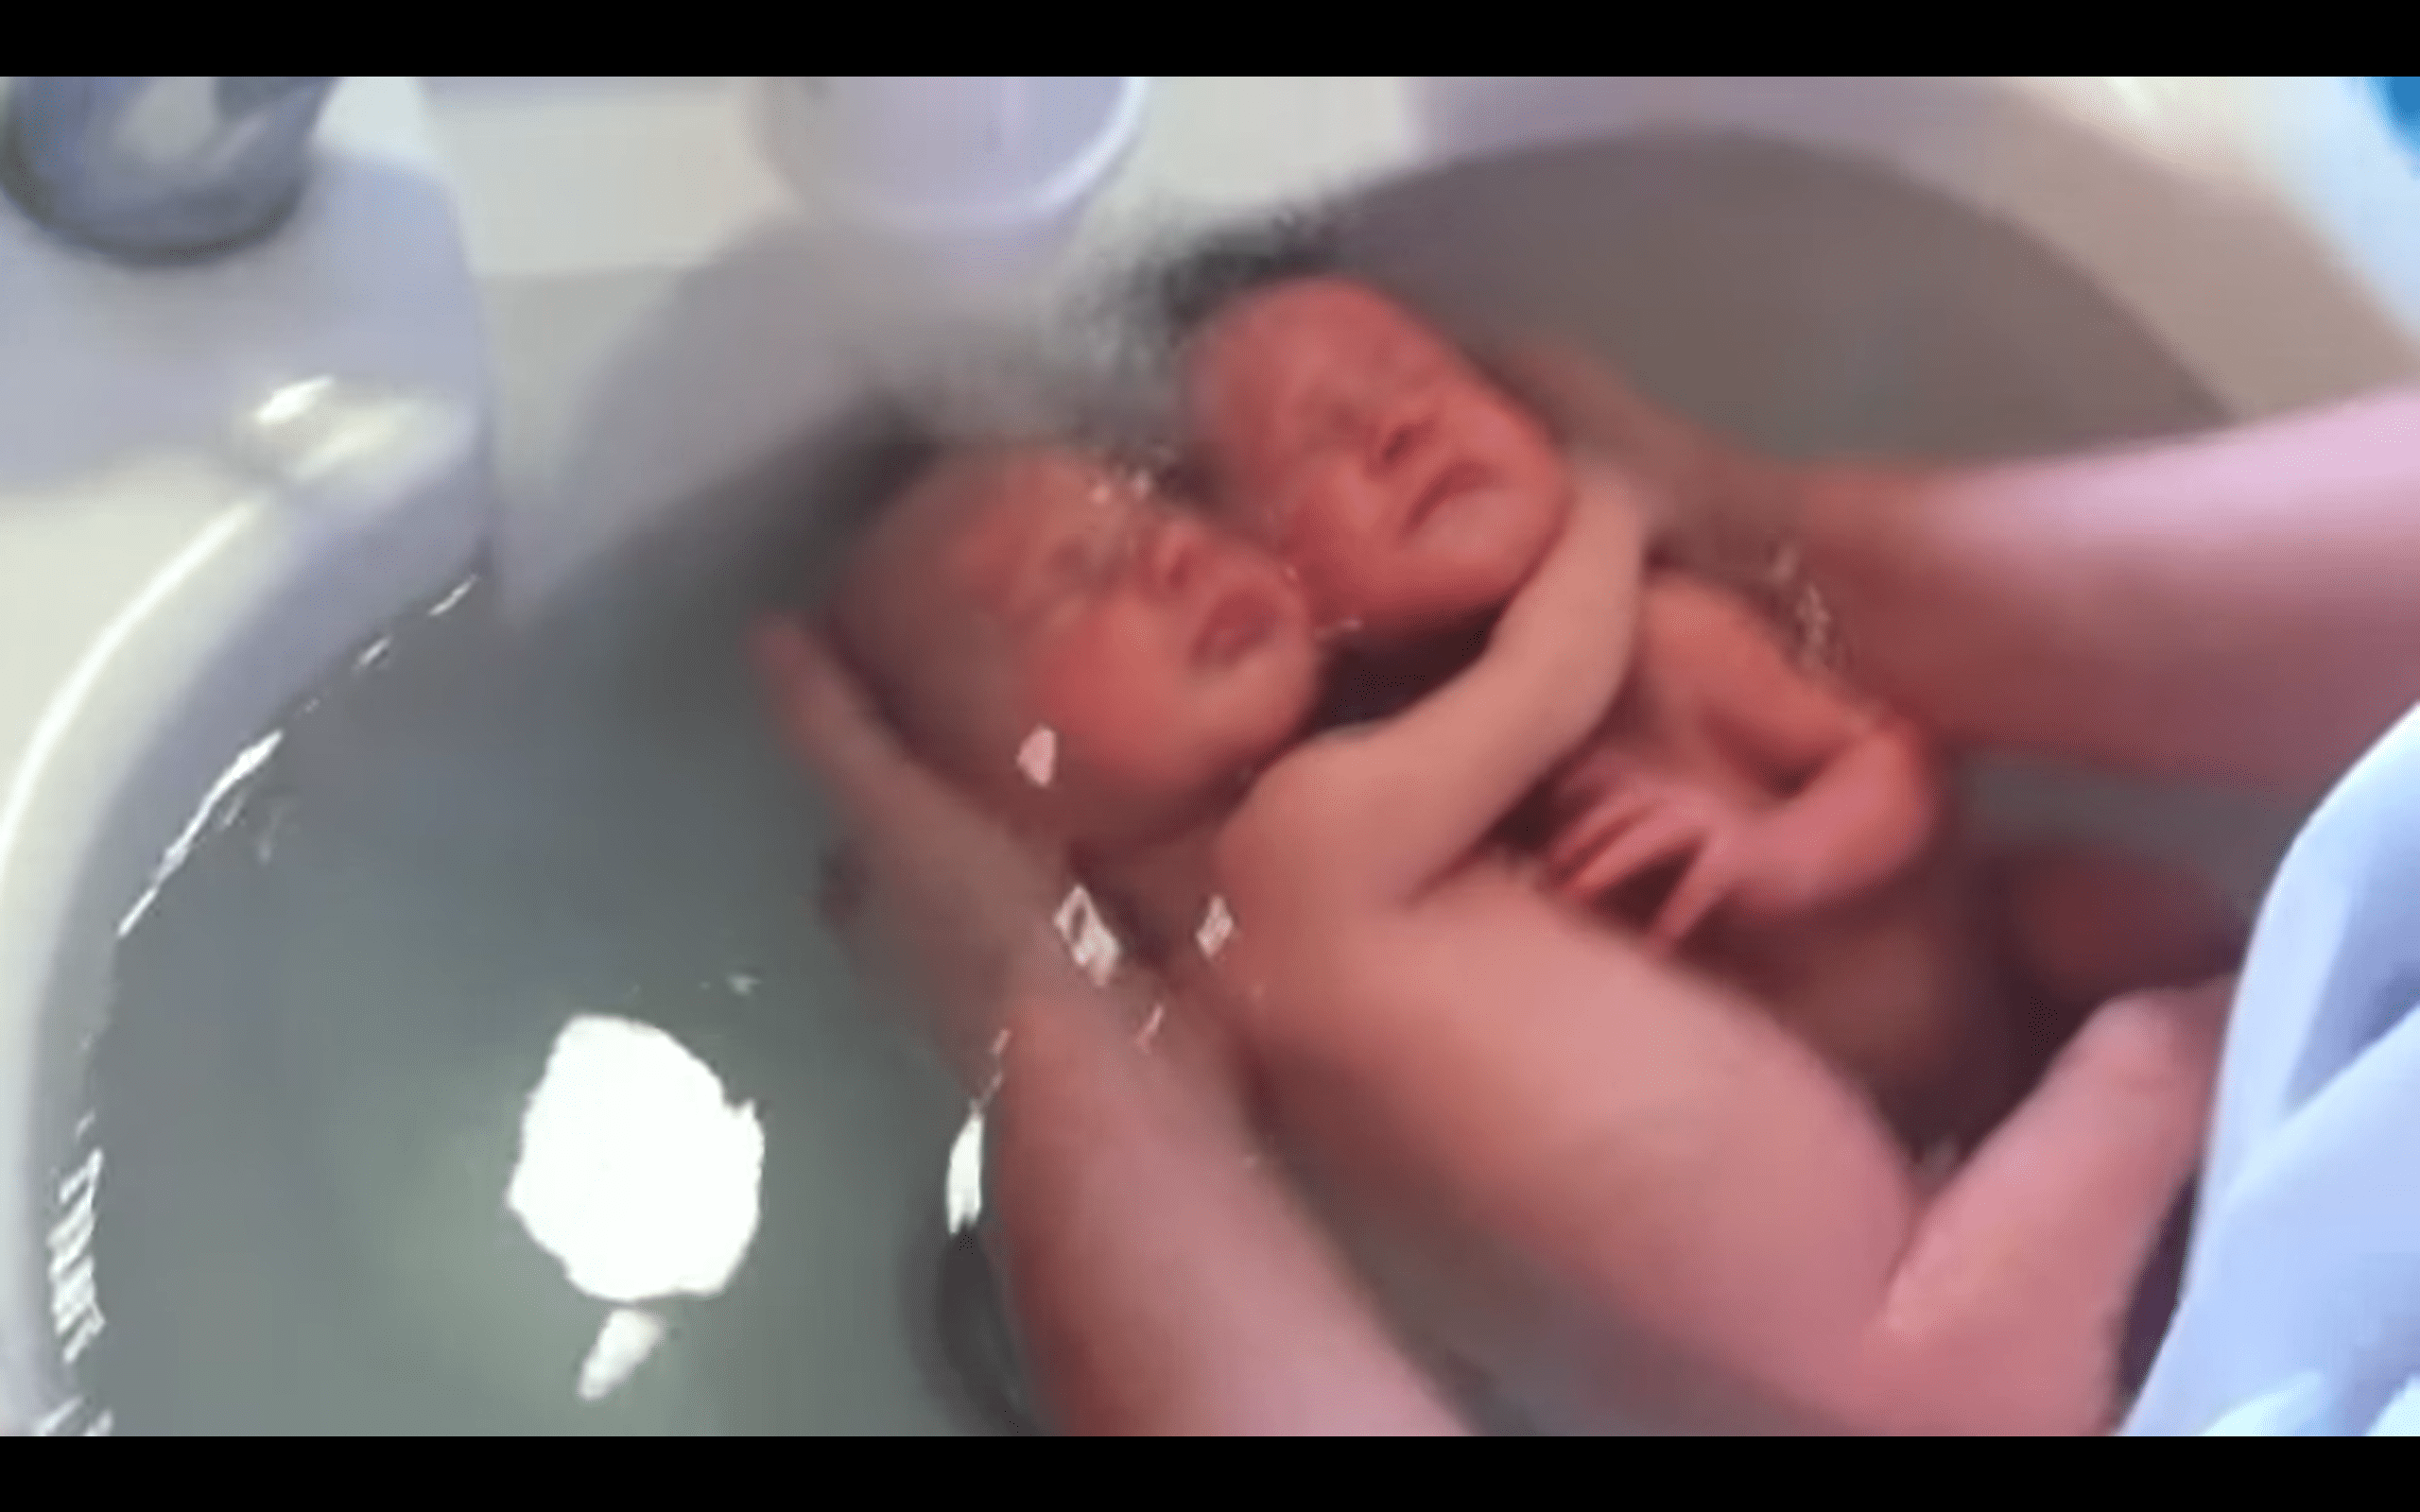 Twin babies holding on to each other in a video shared by a nurse bathing them. | Photo: youtube.com/massagebebe